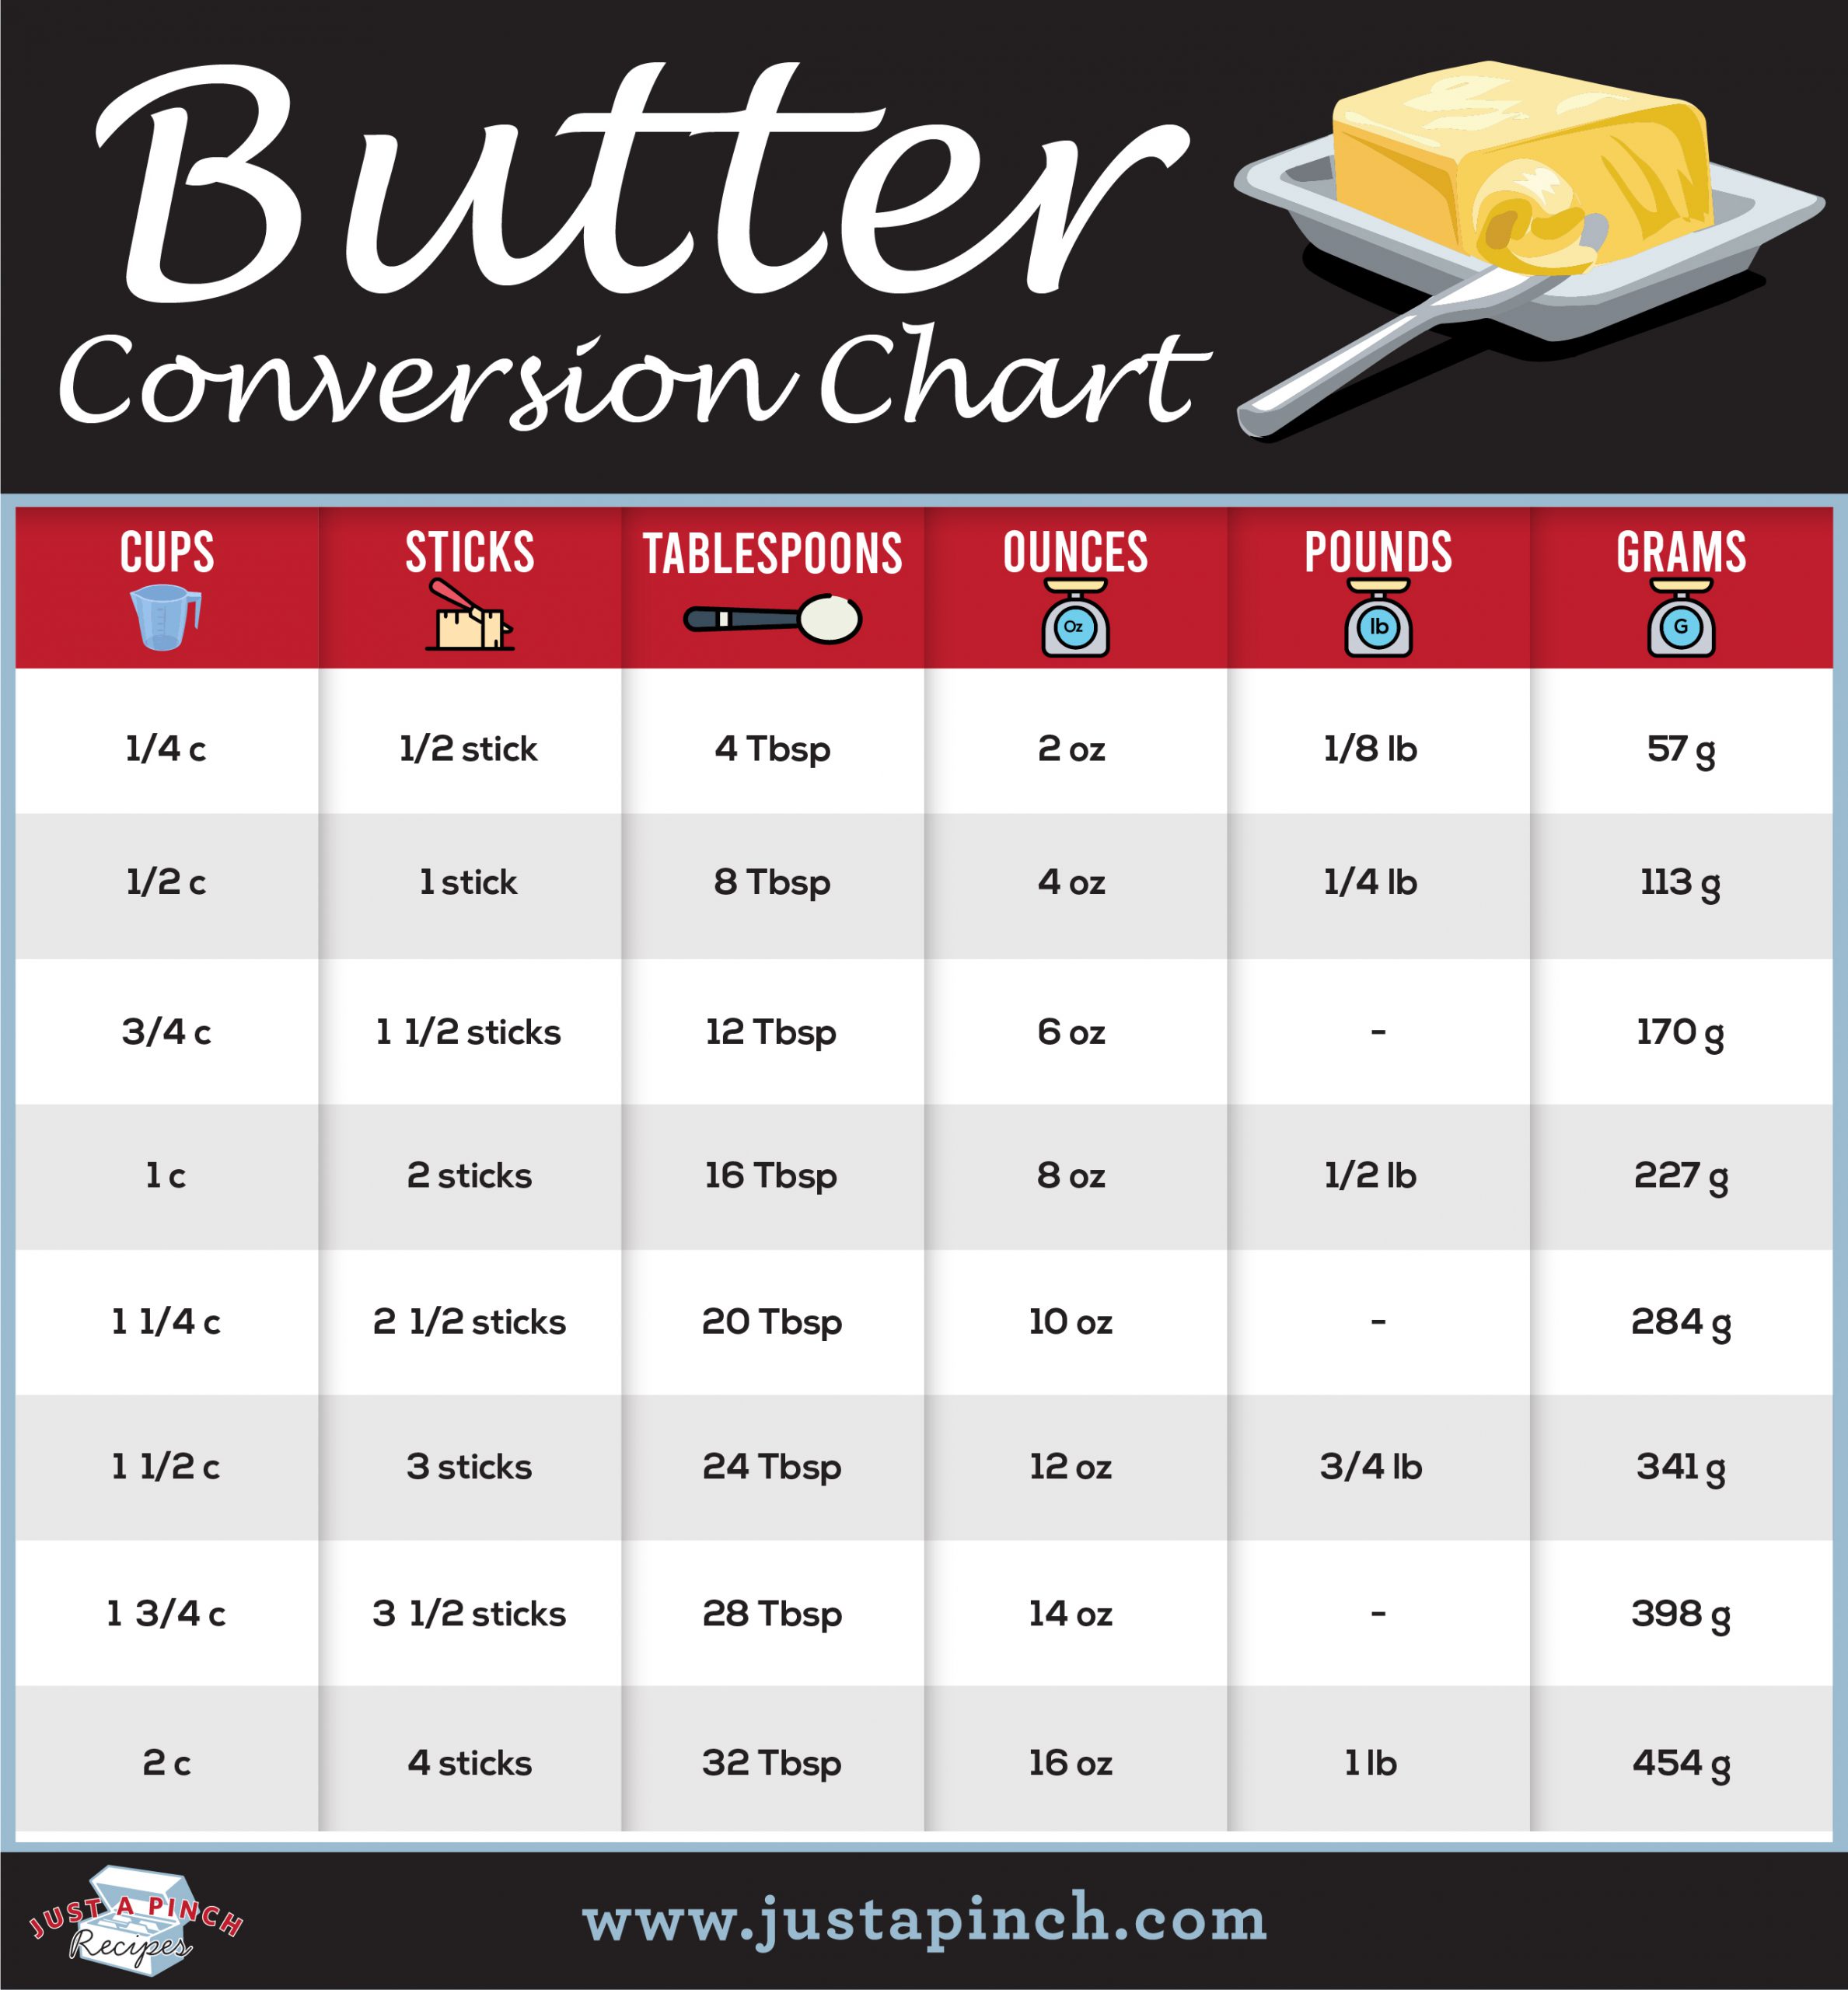 How Much Is a Stick of Butter Exactly? (With Conversion Chart!)